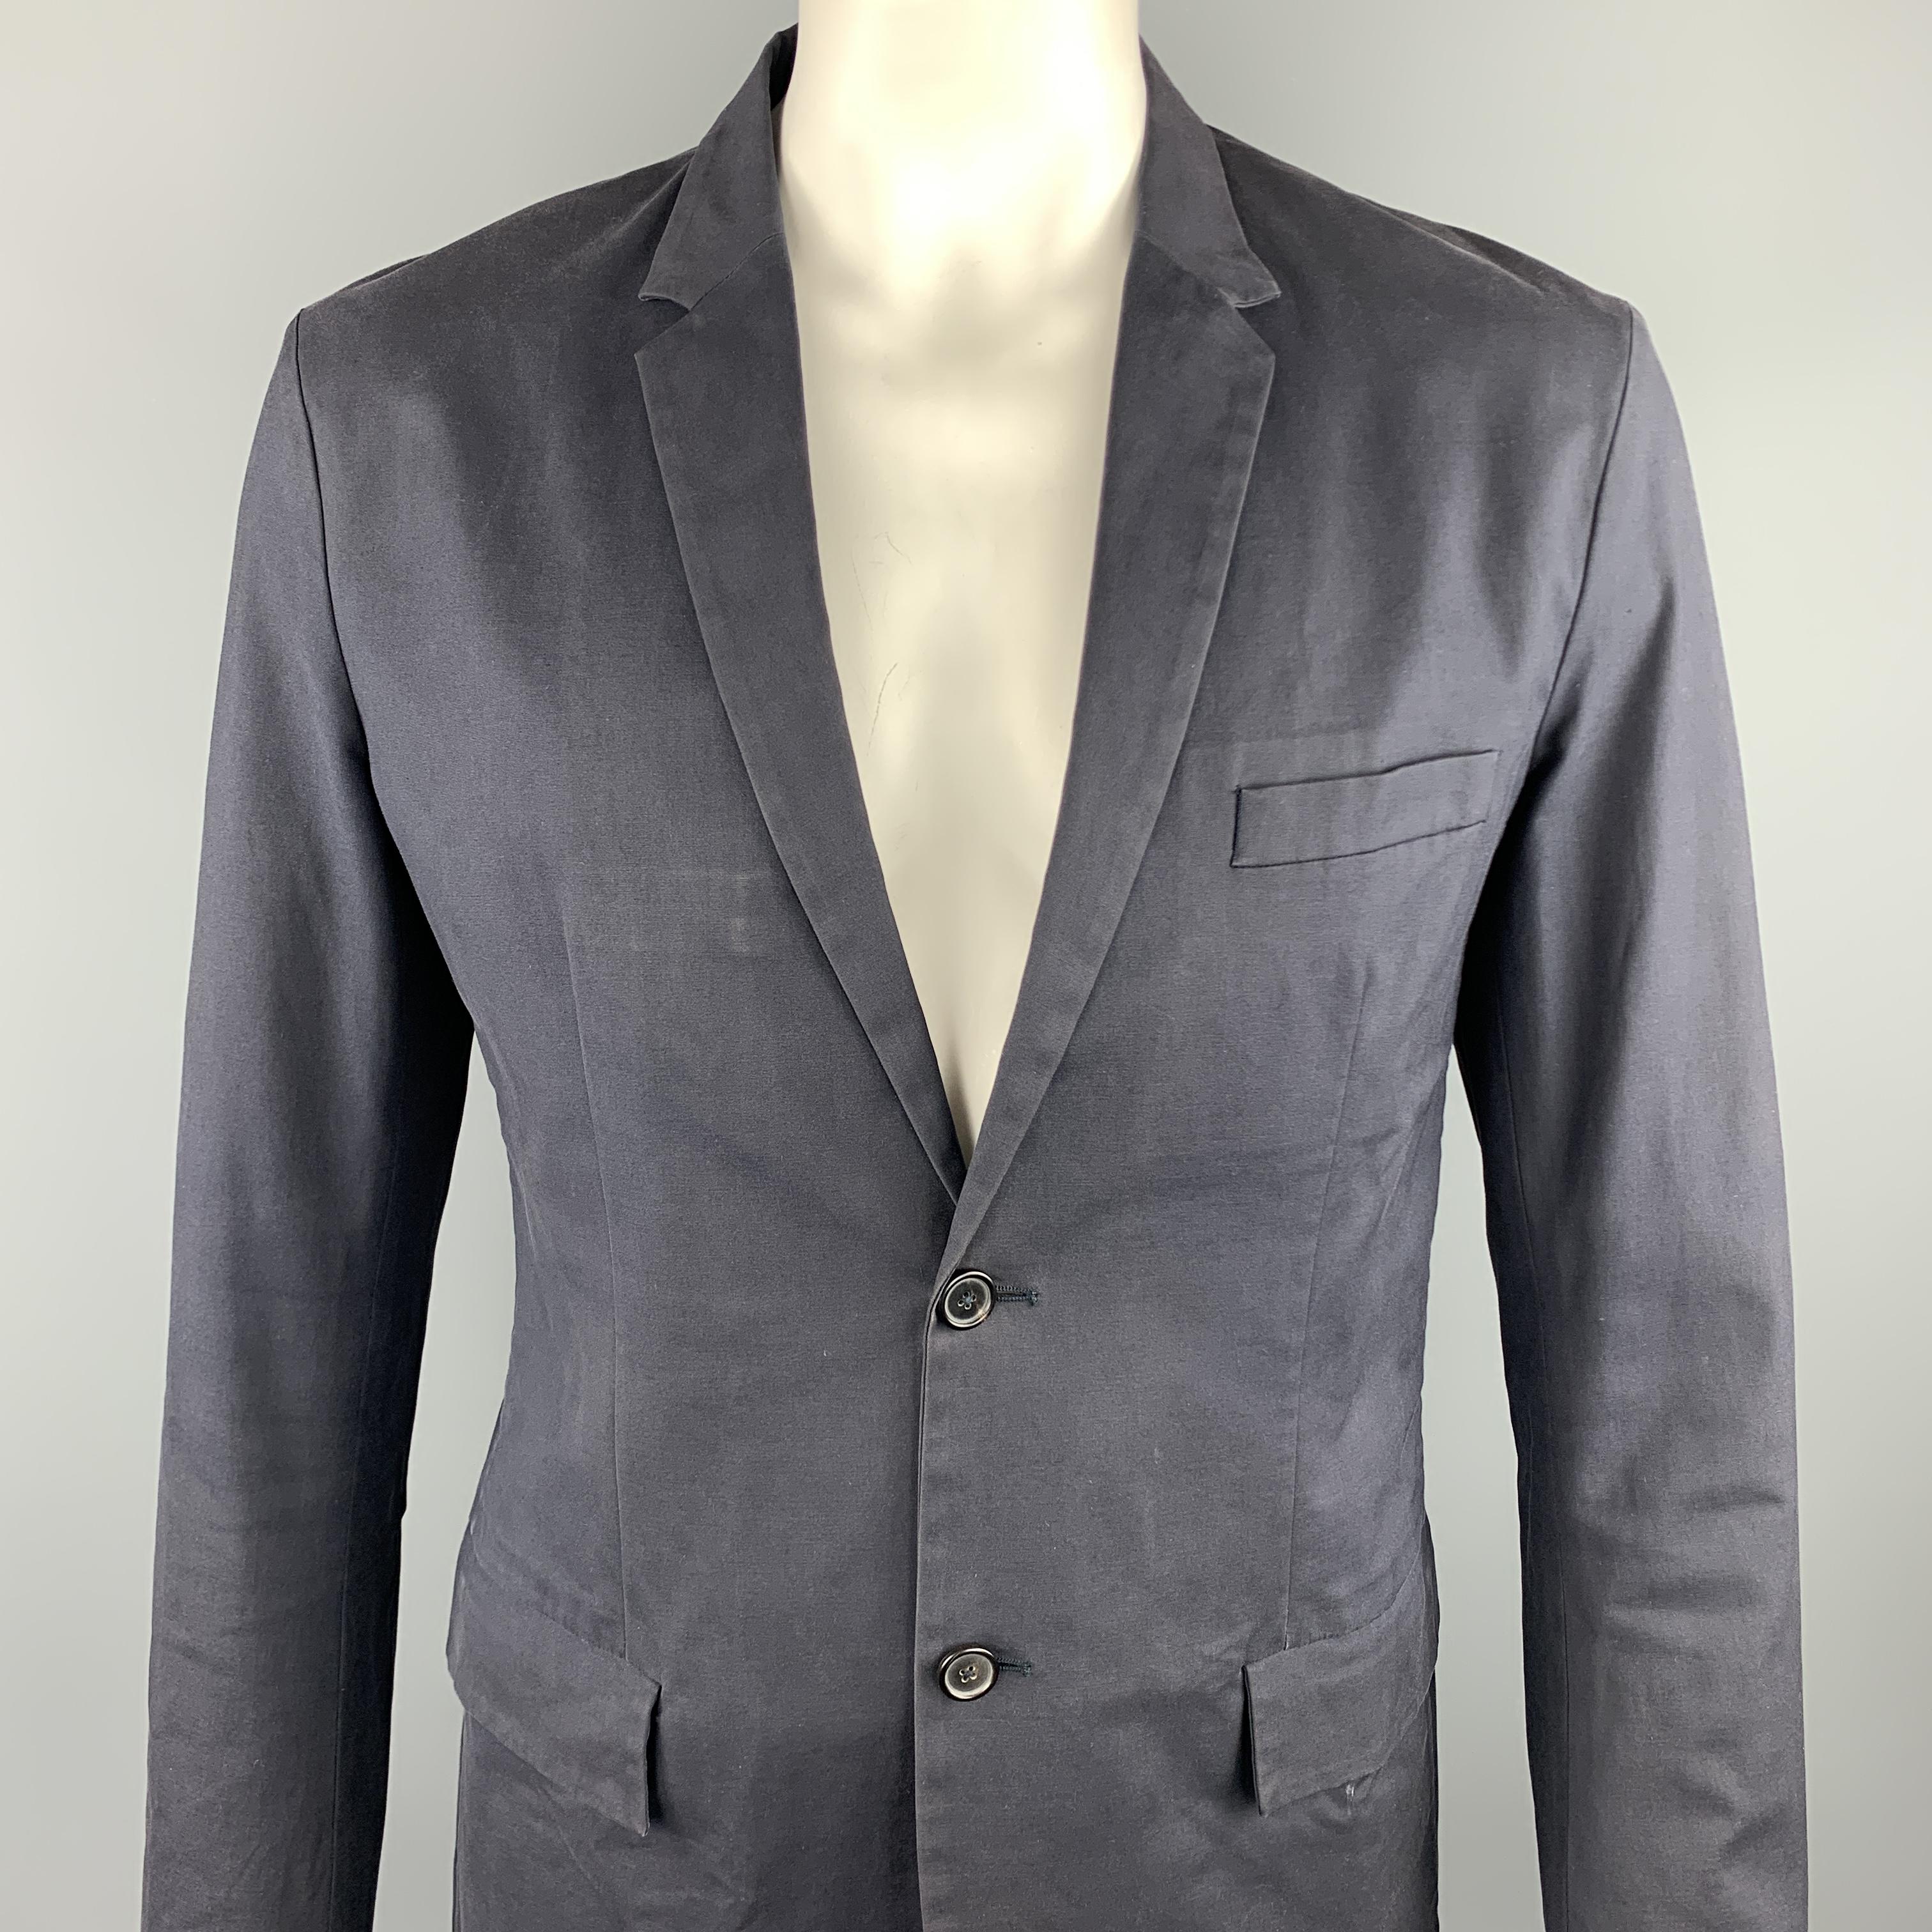 JIL SANDER sport coat comes in a navy cotton blend featuring a notch lapel style, flap pockets, and a two button closure. As-Is. Made in Italy.

Good Pre-Owned Condition.
Marked: IT 54

Measurements:

Shoulder: 19 in. 
Chest: 44 in. 
Sleeve: 28 in.